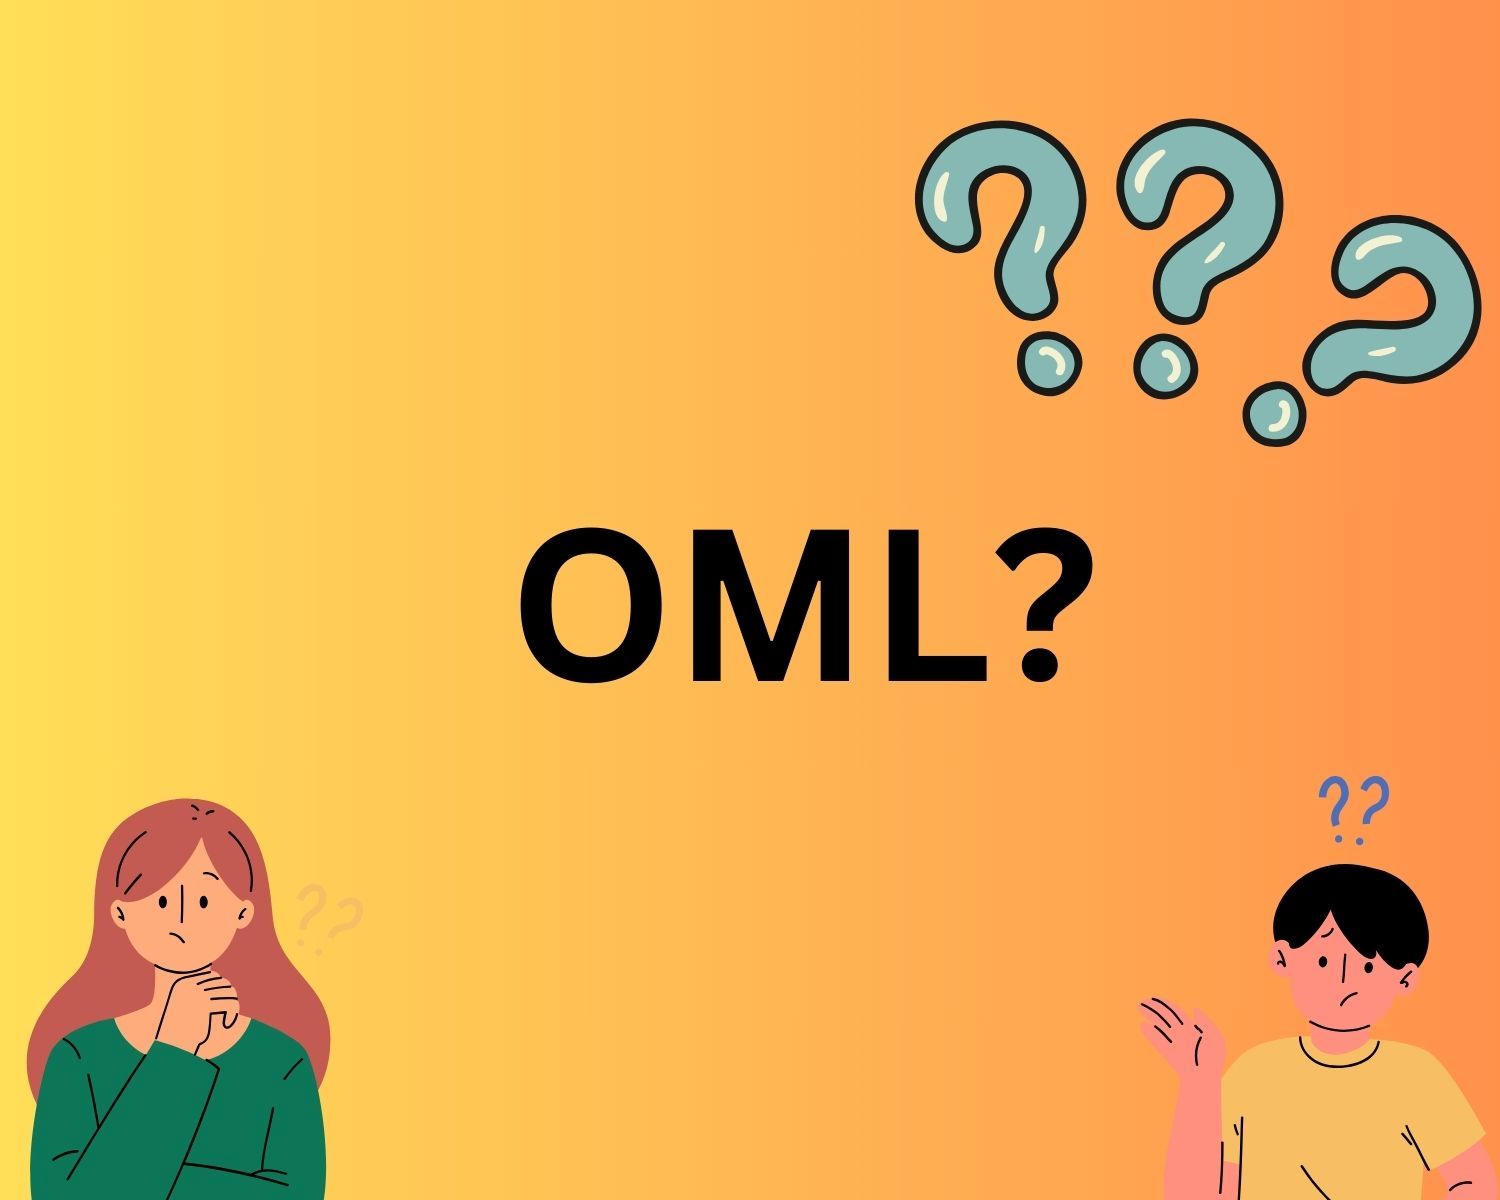 OML Stands For “Oh My Lord” Or “Oh My Life” In Text.